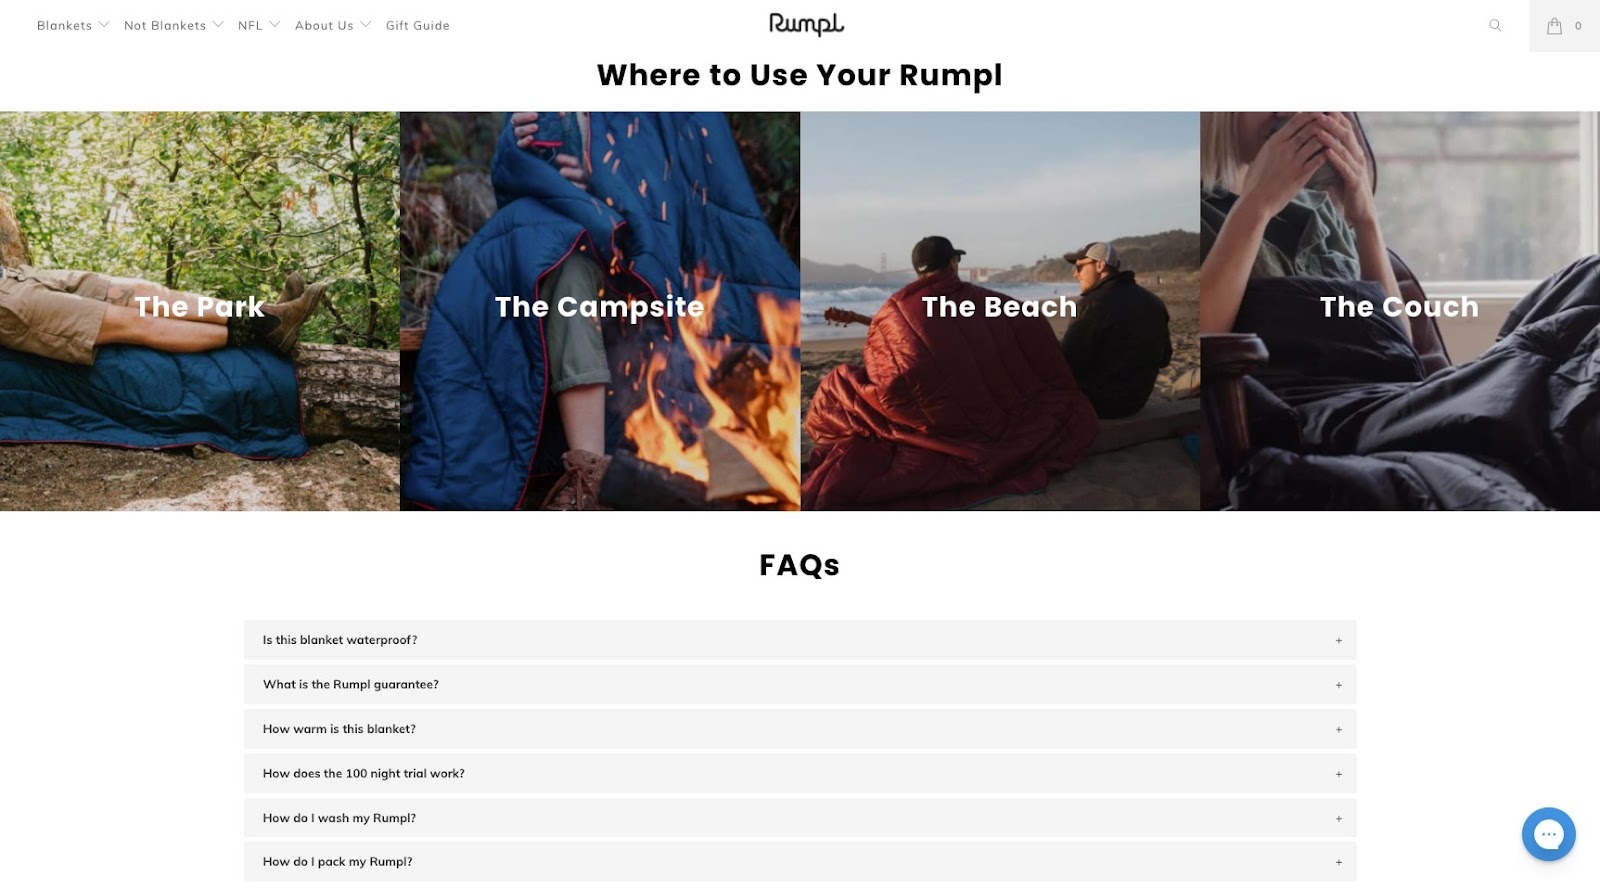 rumpl where to use and faqs section